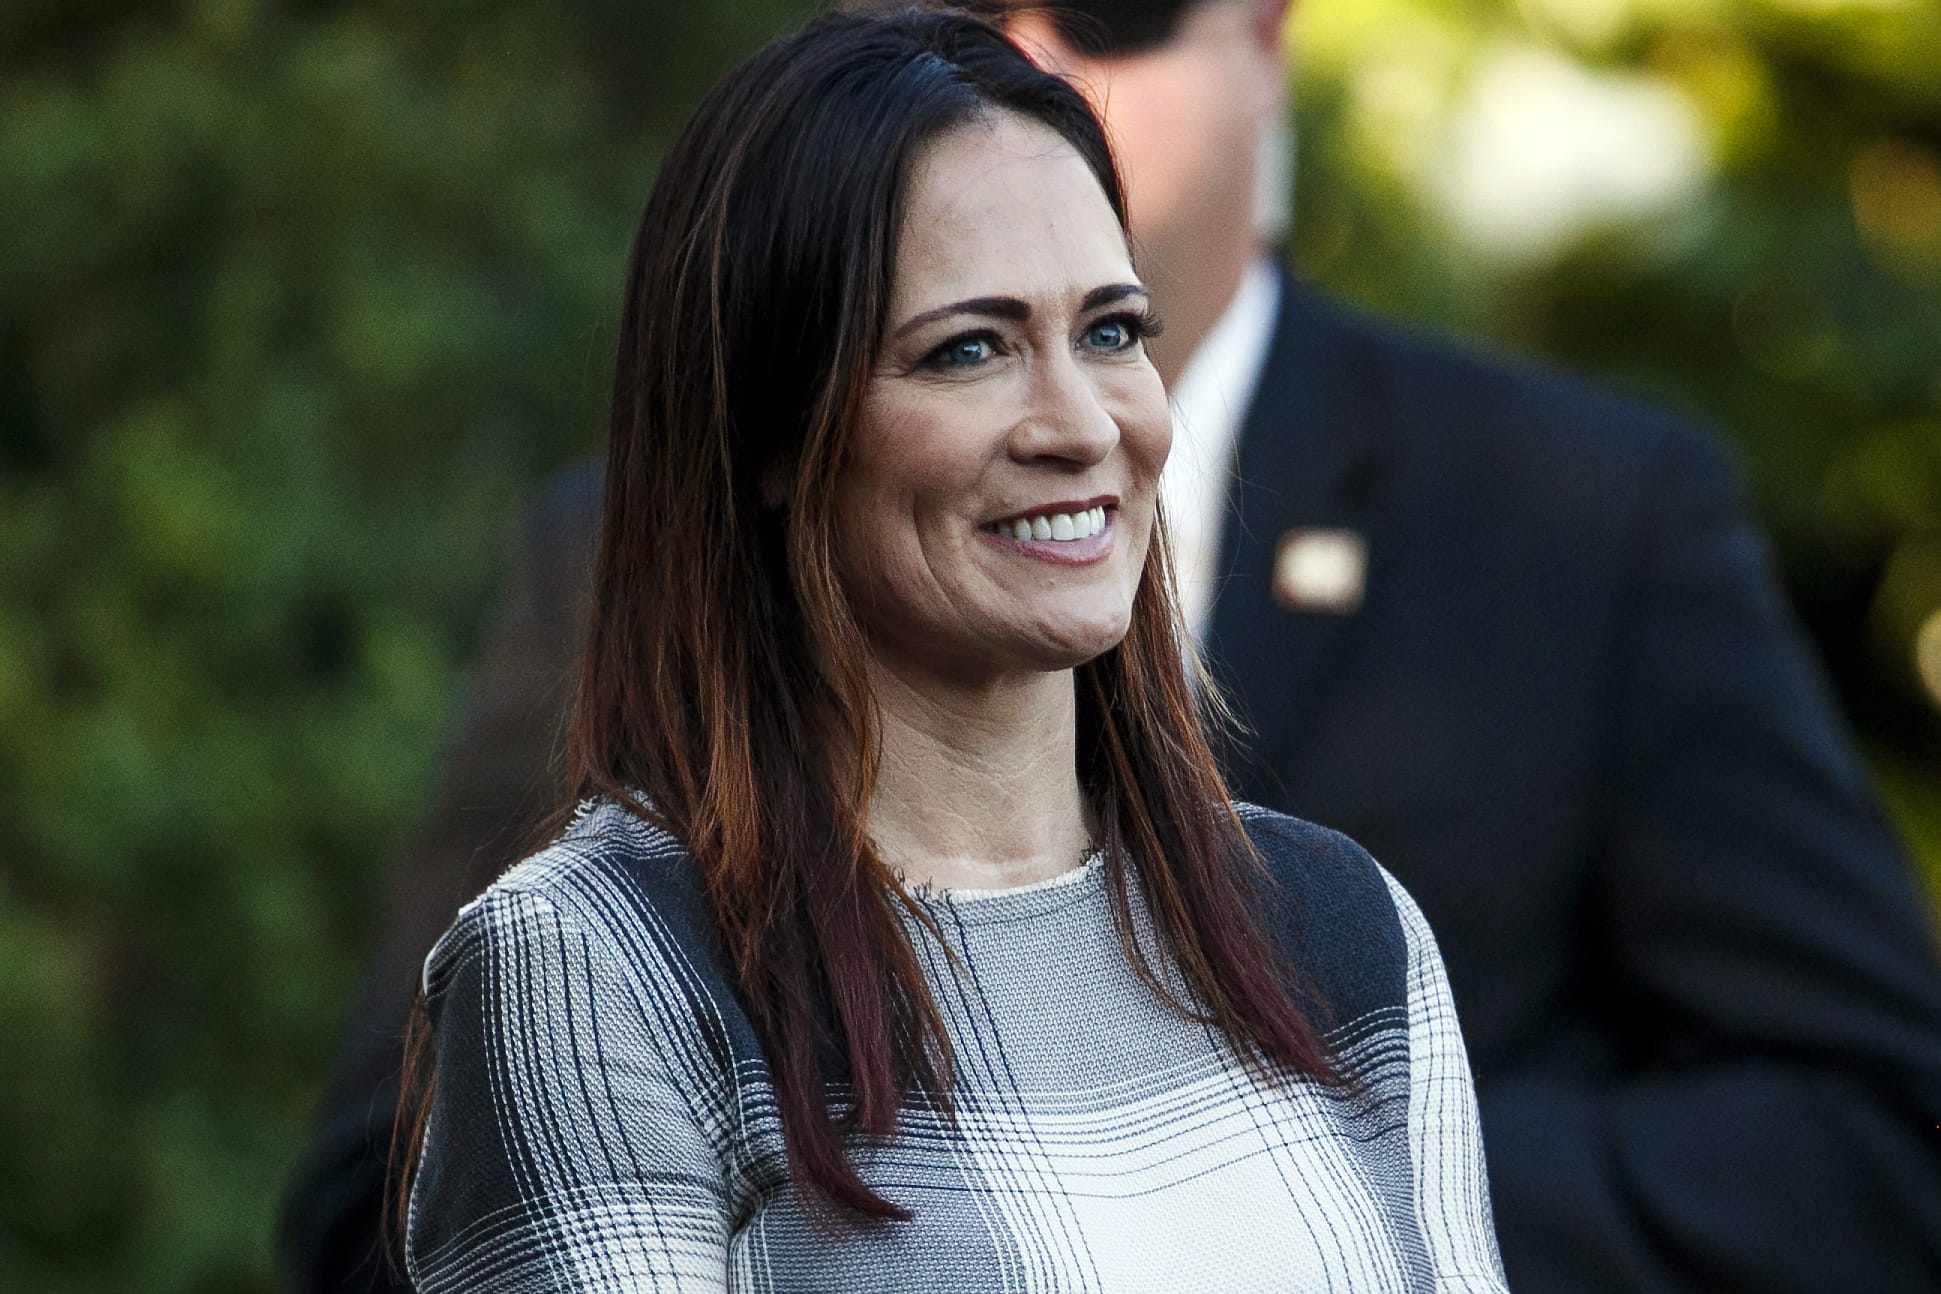 In this June 21, 2019 photo, Stephanie Grisham, spokeswoman for first lady Melania Trump, watches as President Donald Trump and the first lady greet attendees during the annual Congressional Picnic on the South Lawn in Washington. First lady Melania Trump has announced that Grisham will be the new White House press secretary. Grisham, who has been with President Donald Trump since 2015, will also take on the role of White House communications director.